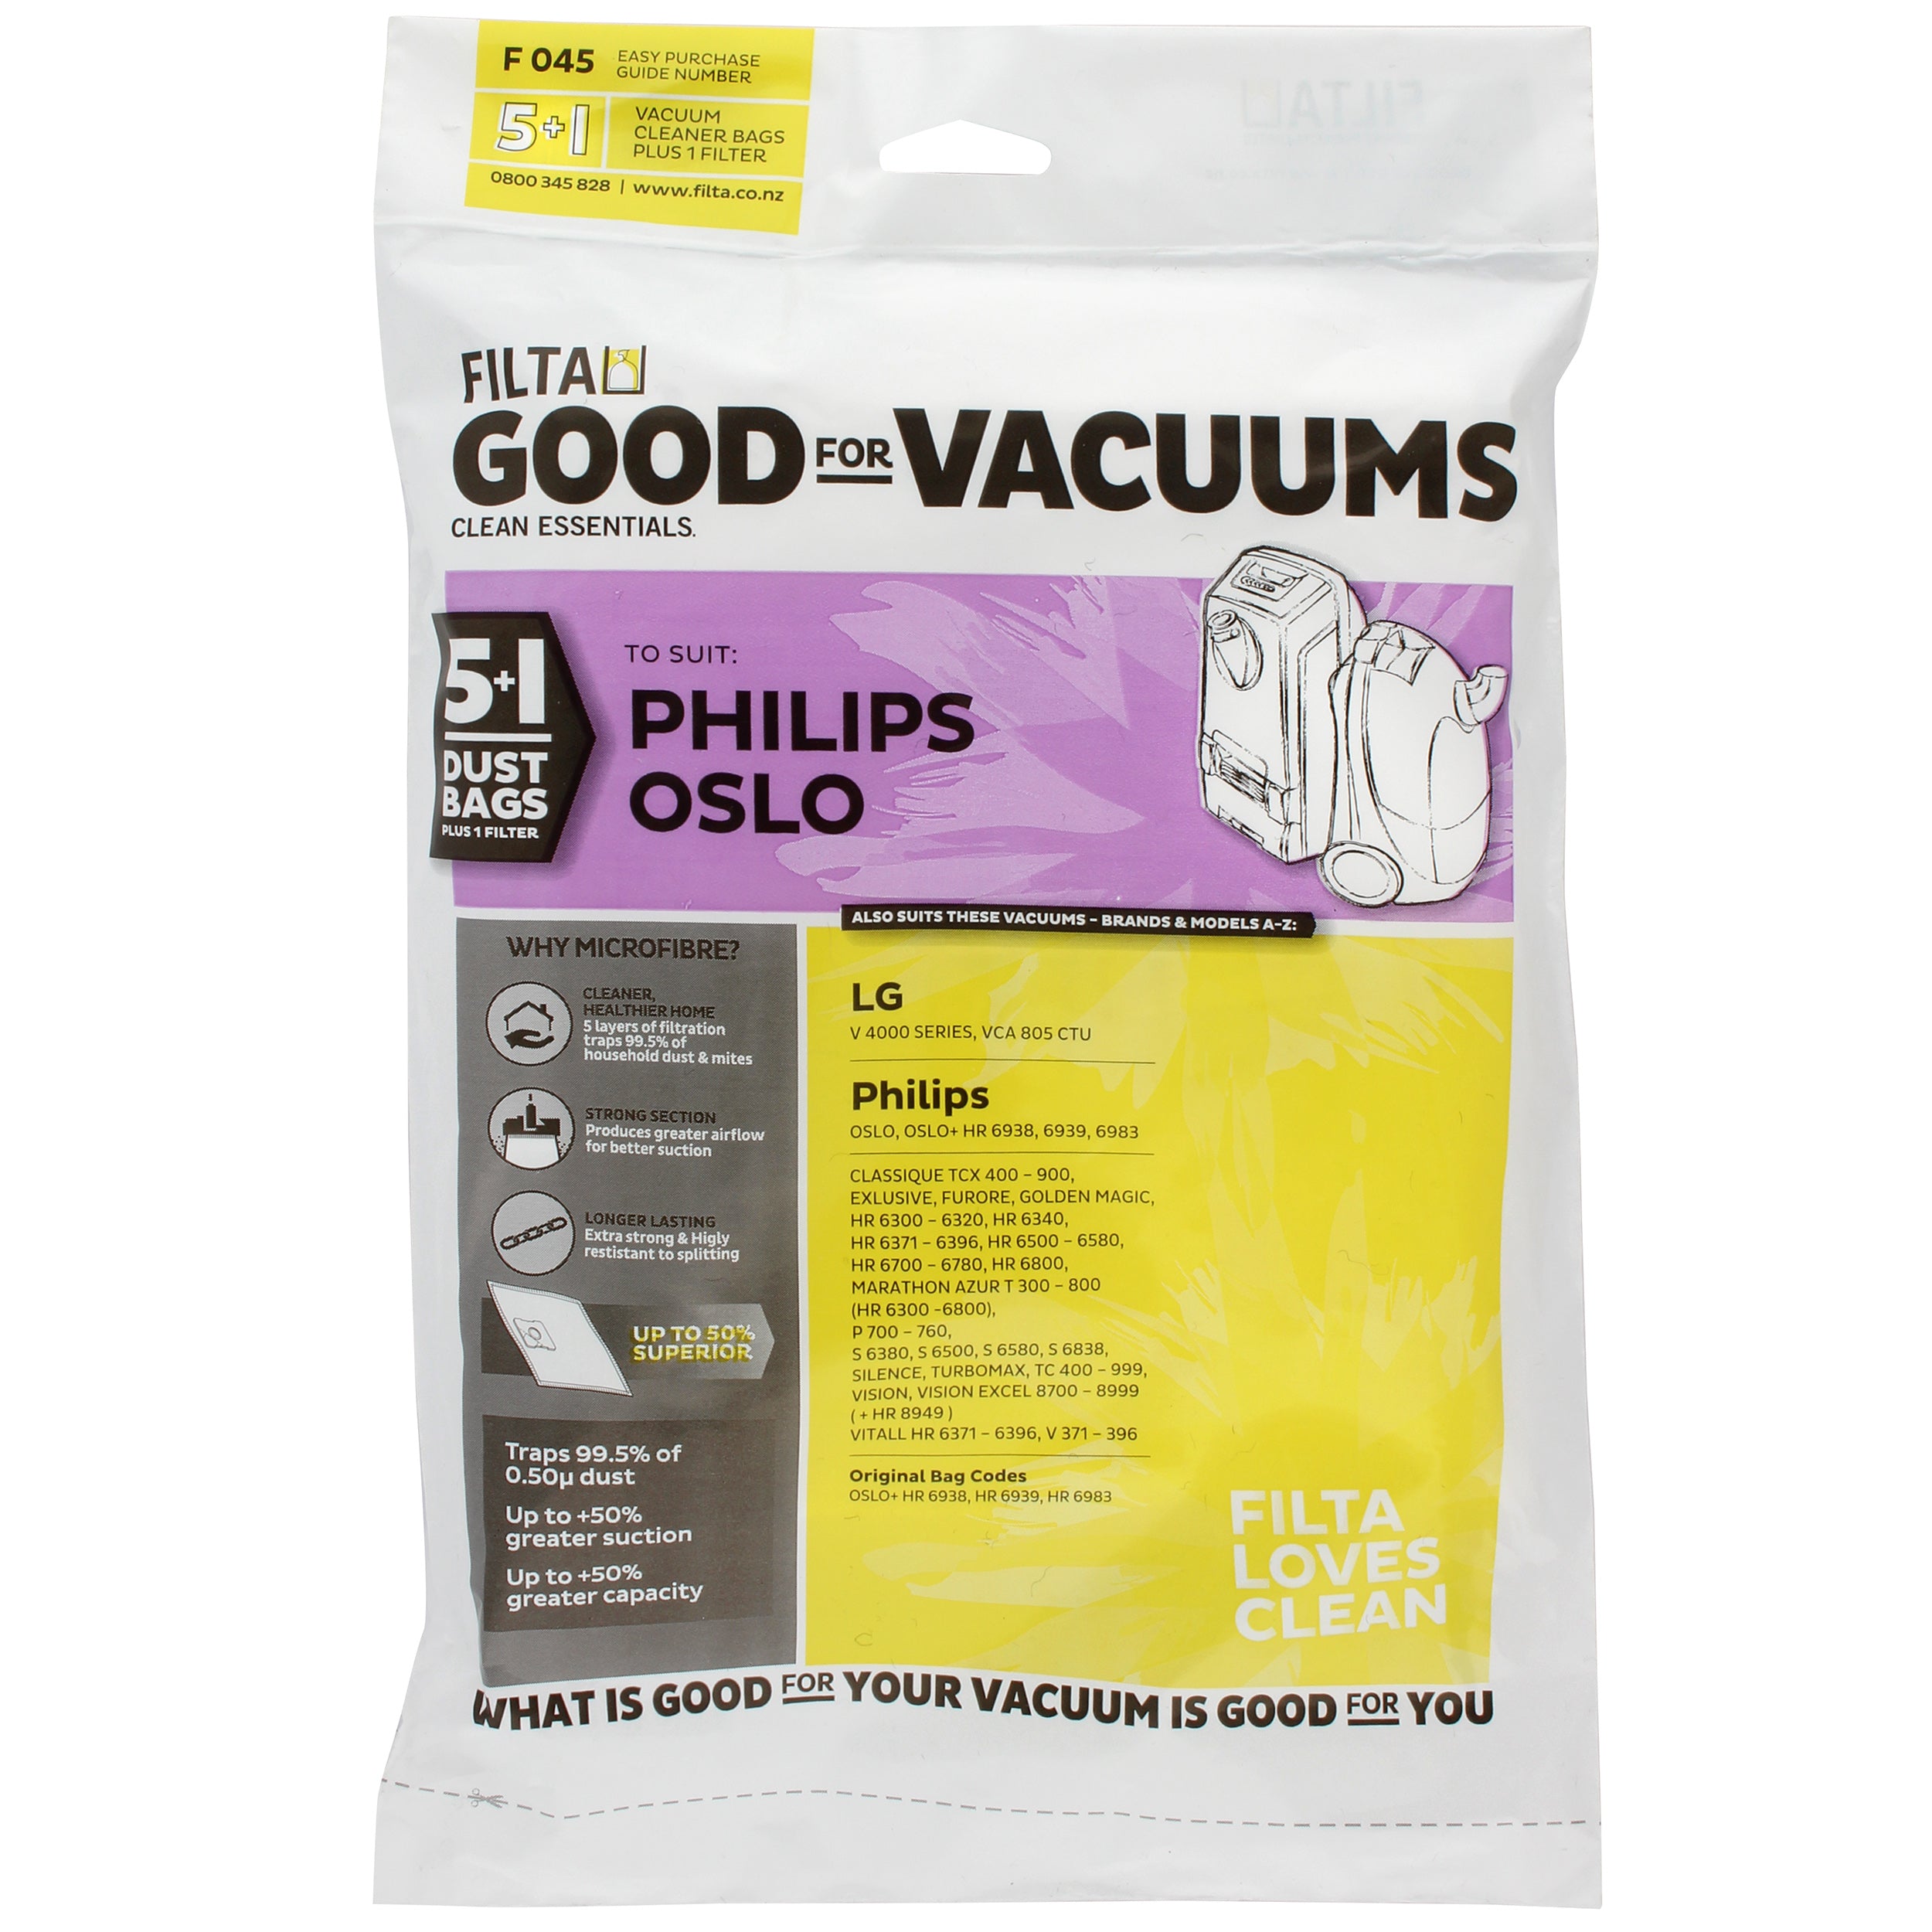 FILTA PHILIPS OSLO SMS MULTI LAYERED VACUUM CLEANER BAGS 5 PACK (F045)